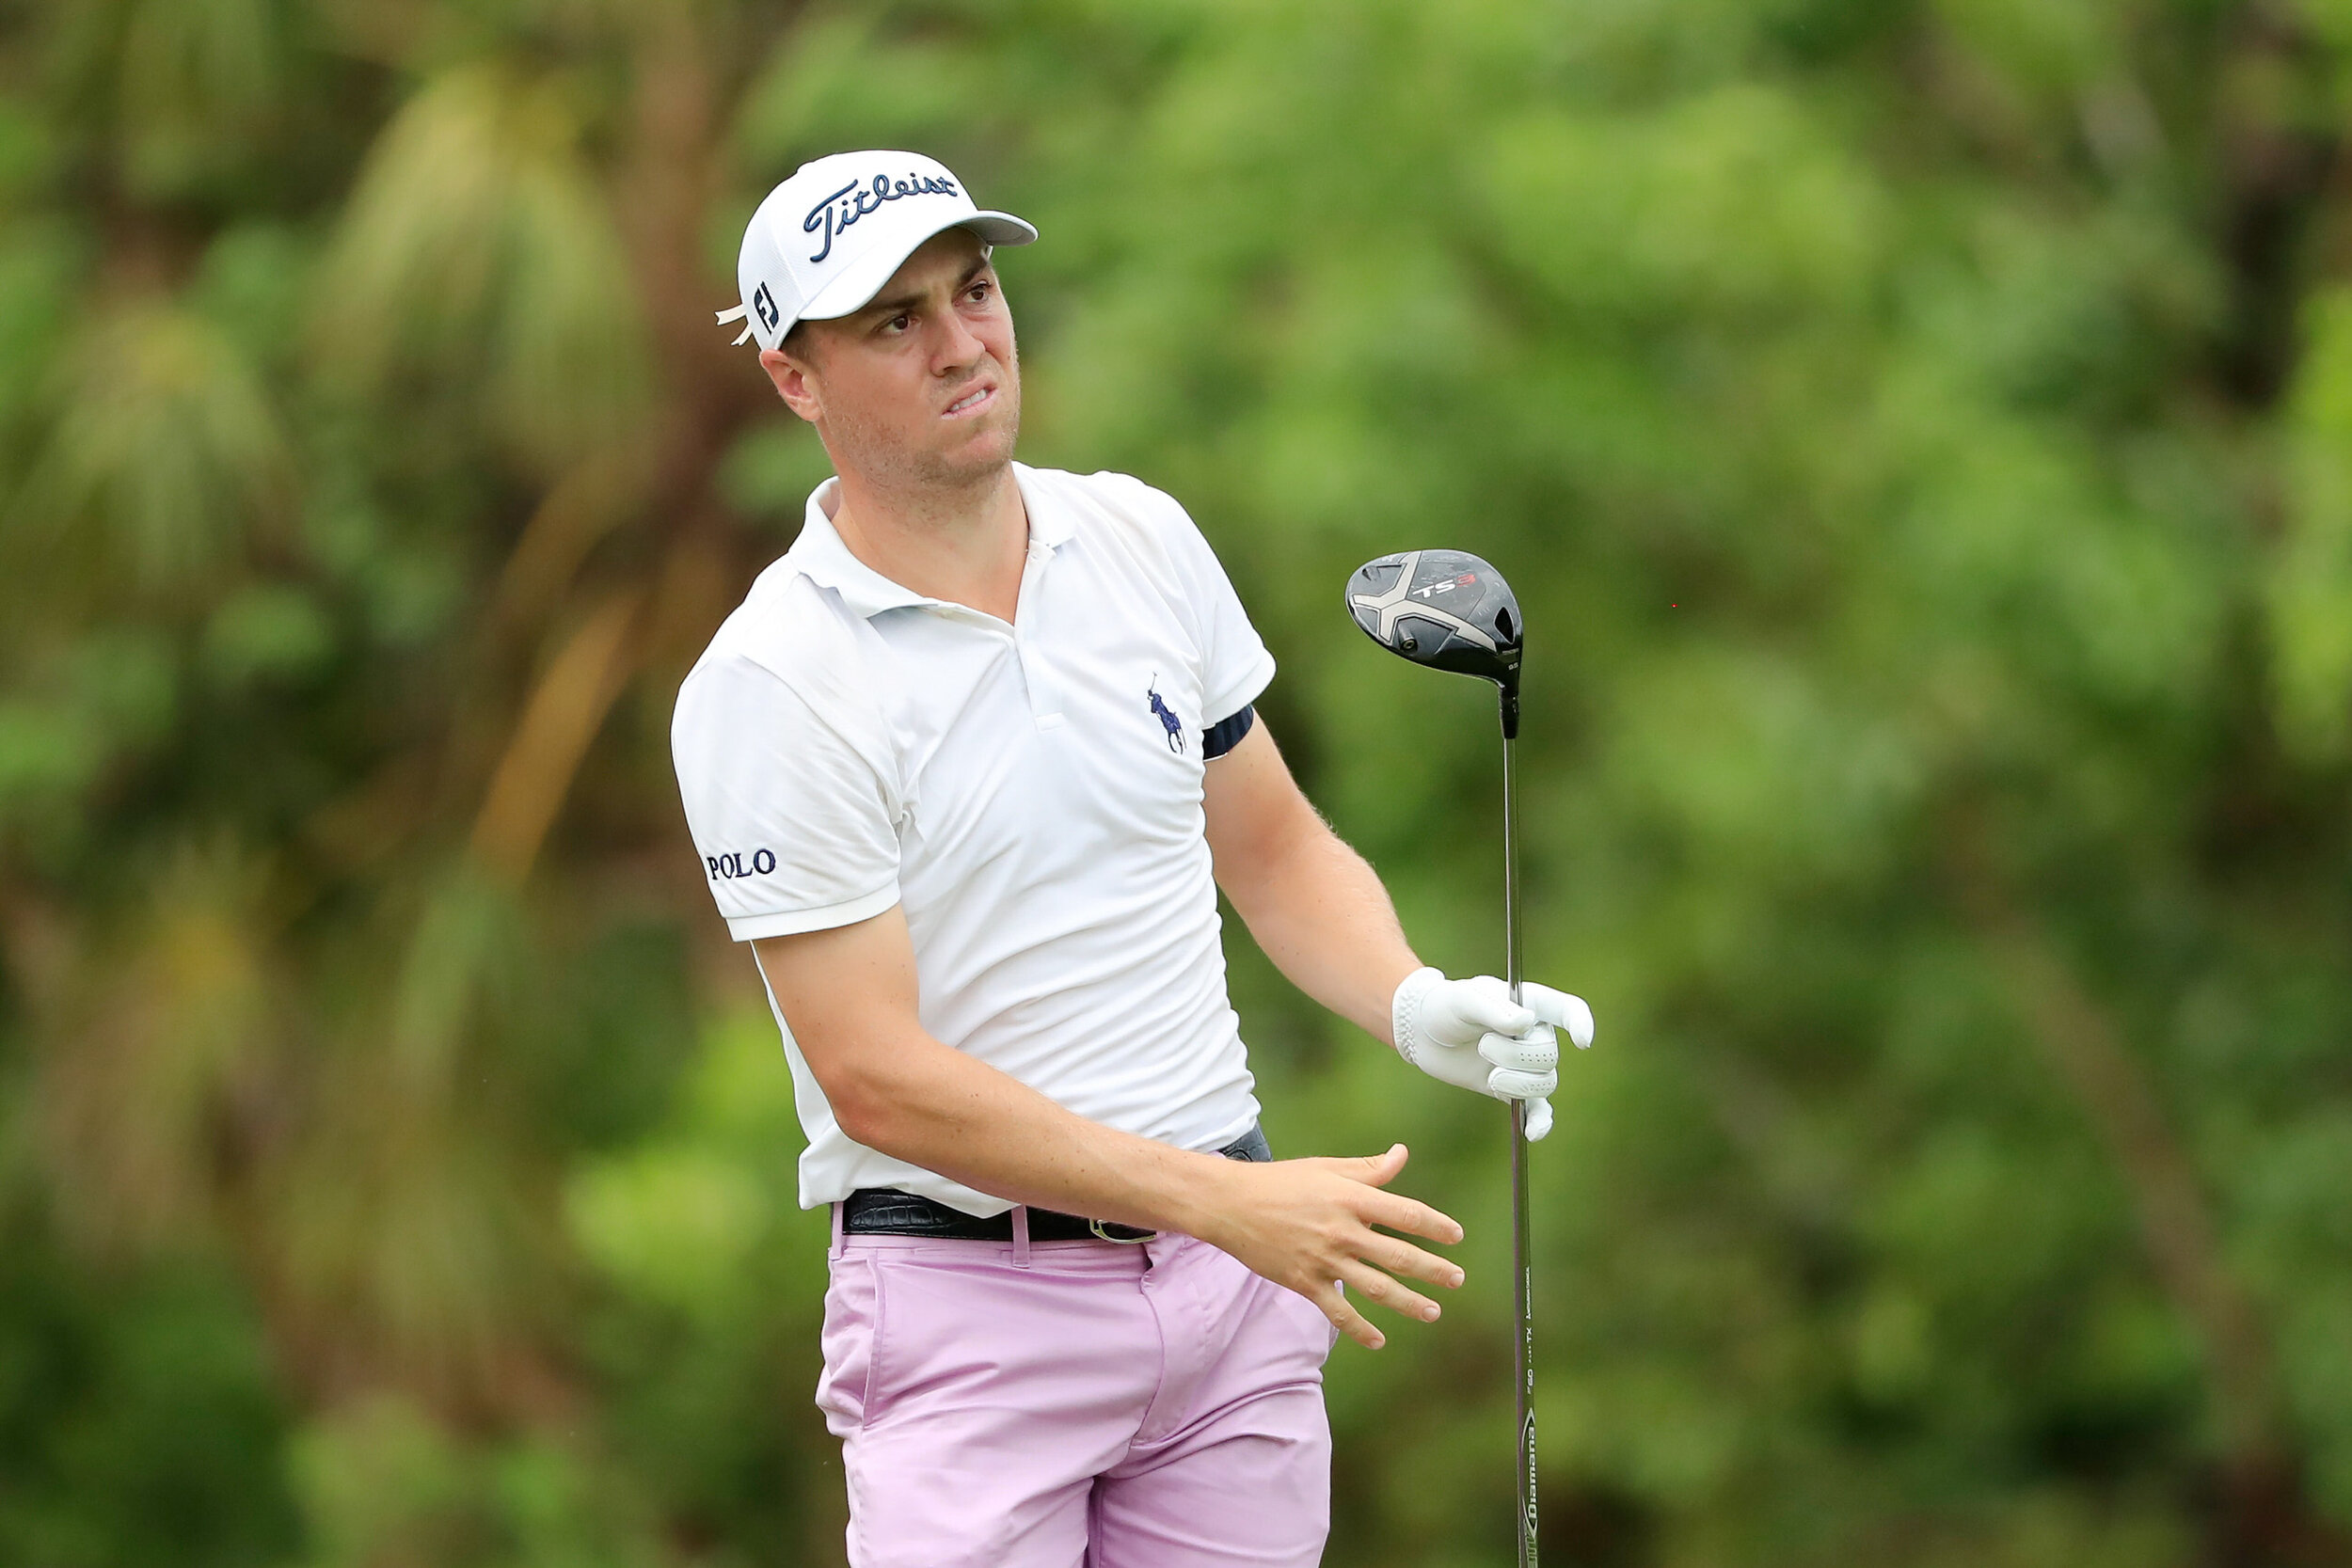  PLAYA DEL CARMEN, MEXICO - DECEMBER 06: Justin Thomas of the United States plays his shot from the second tee during the final round of the Mayakoba Golf Classic at El Camaleón Golf Club on December 06, 2020 in Playa del Carmen, Mexico. (Photo by Cl